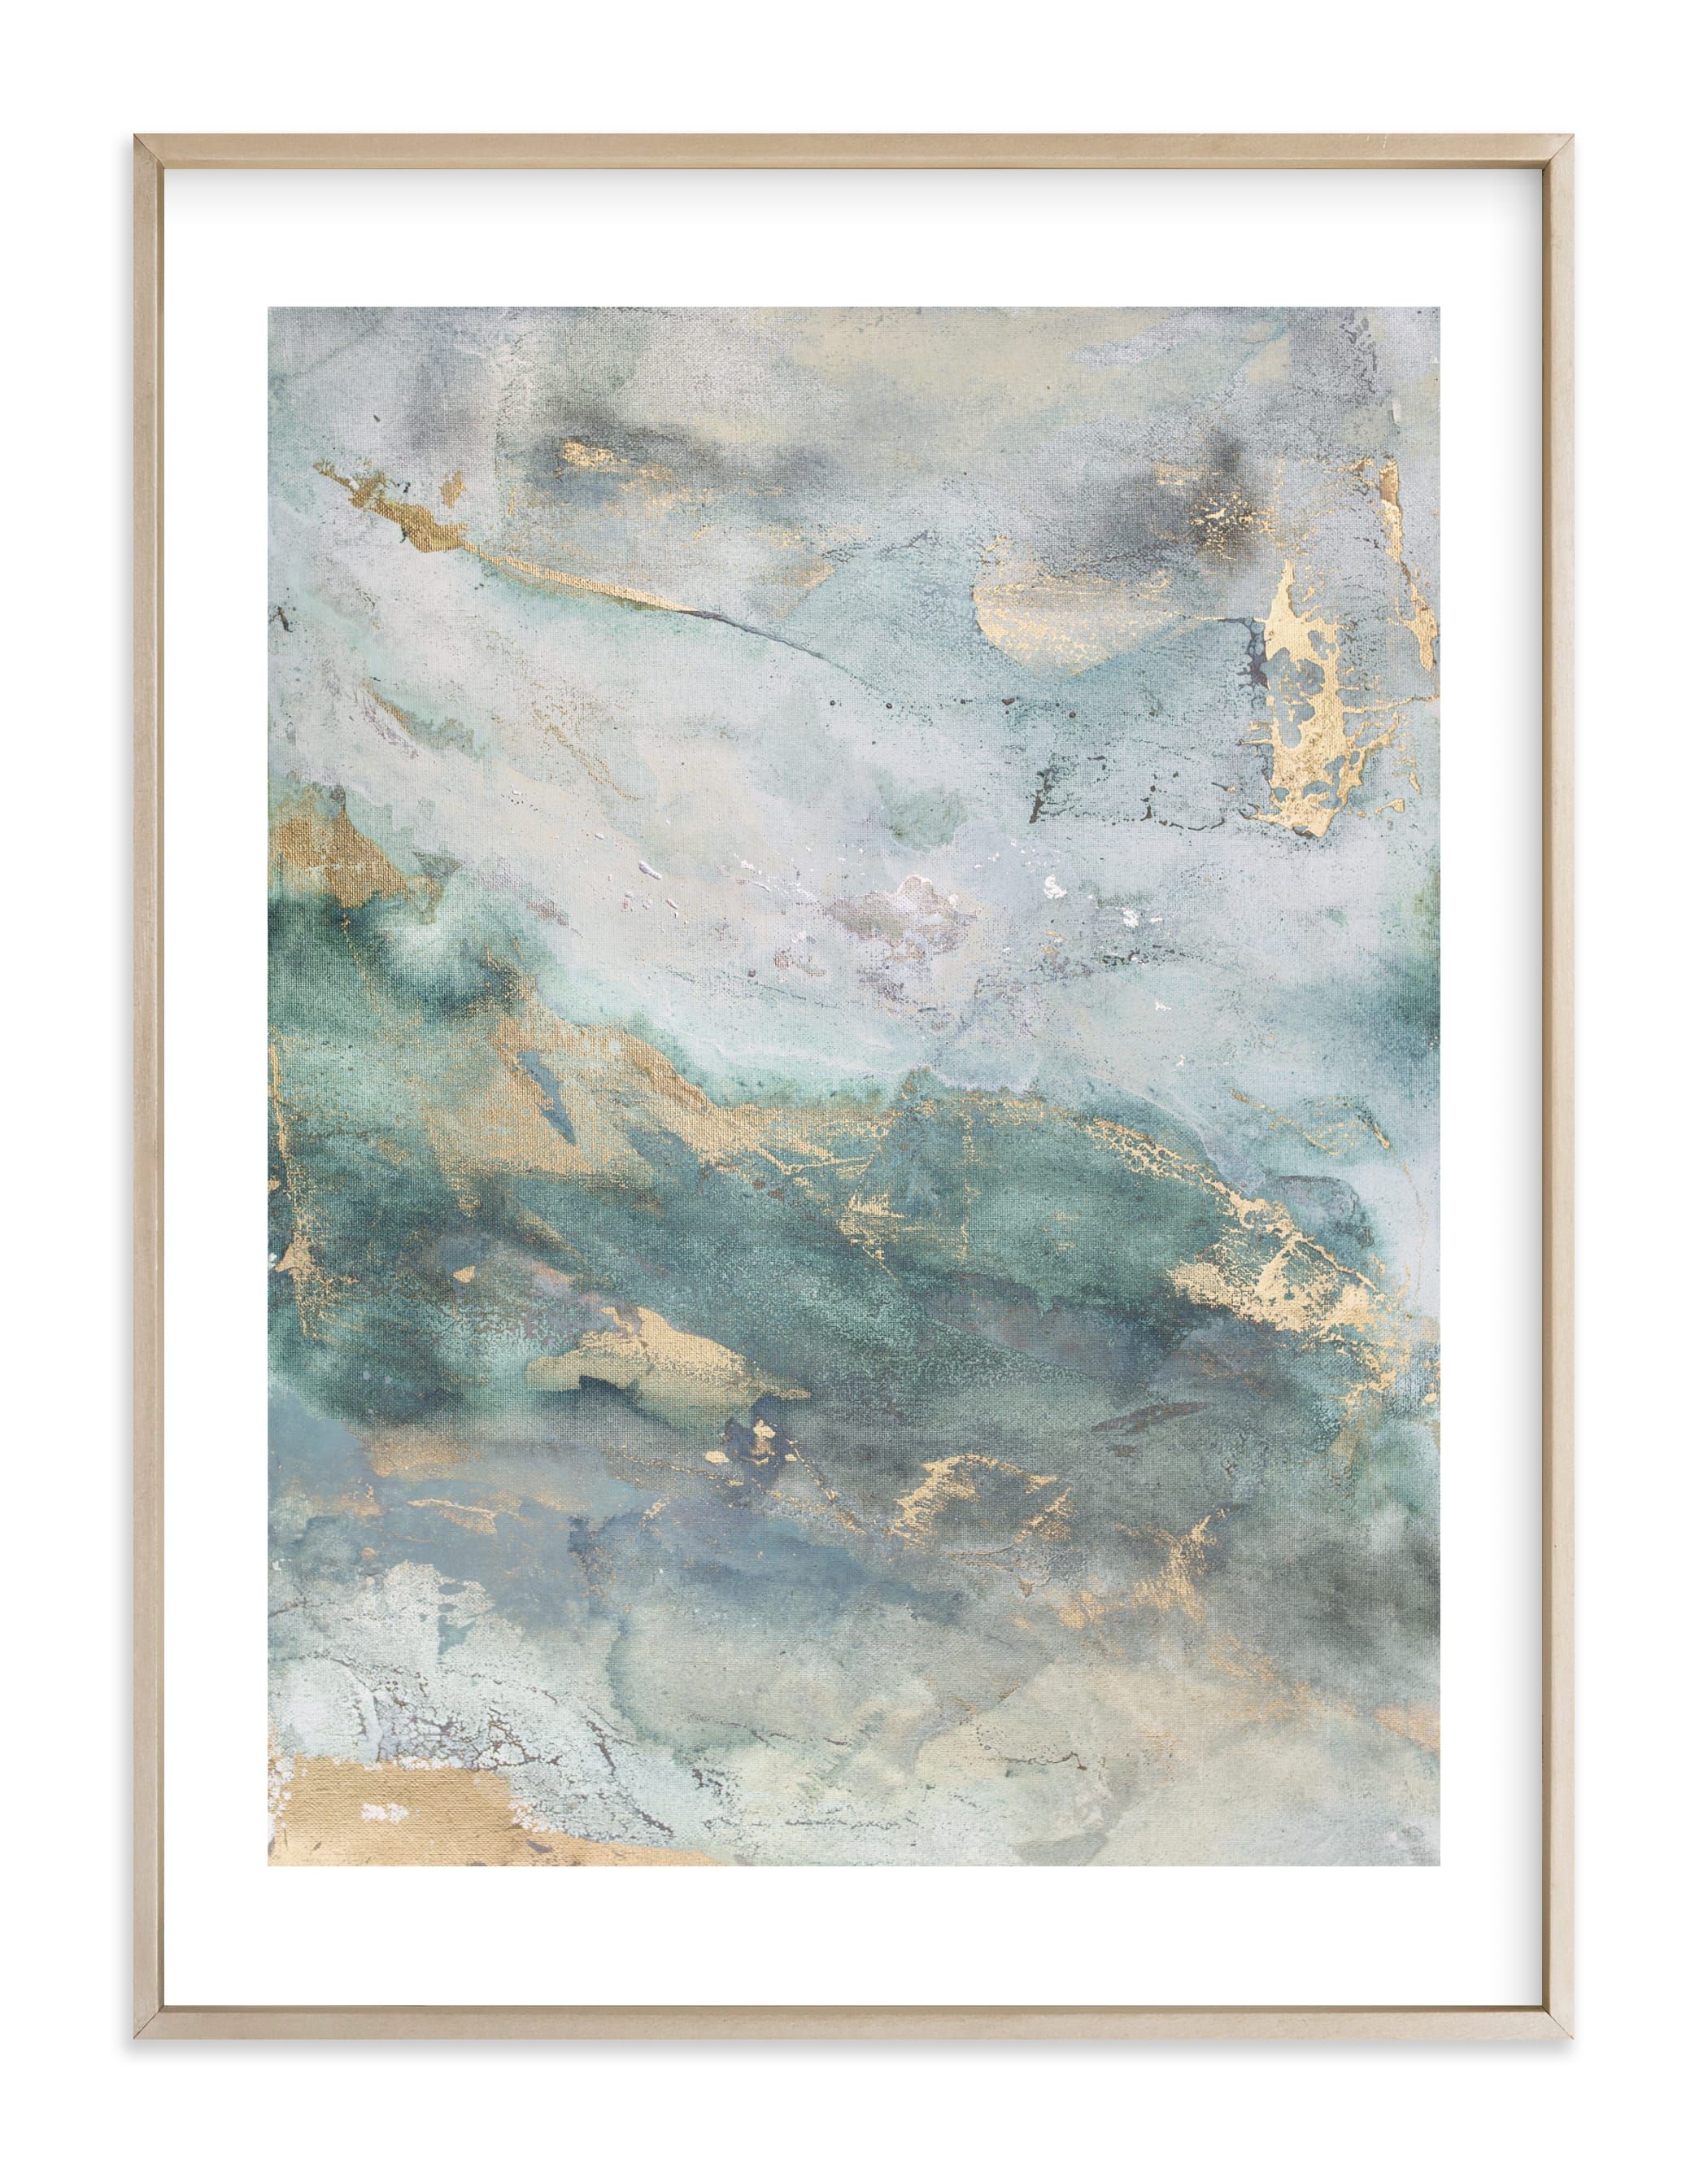 "Luminous Smoke No. 1" - Painting Limited Edition Art Print by Julia Contacessi. | Minted